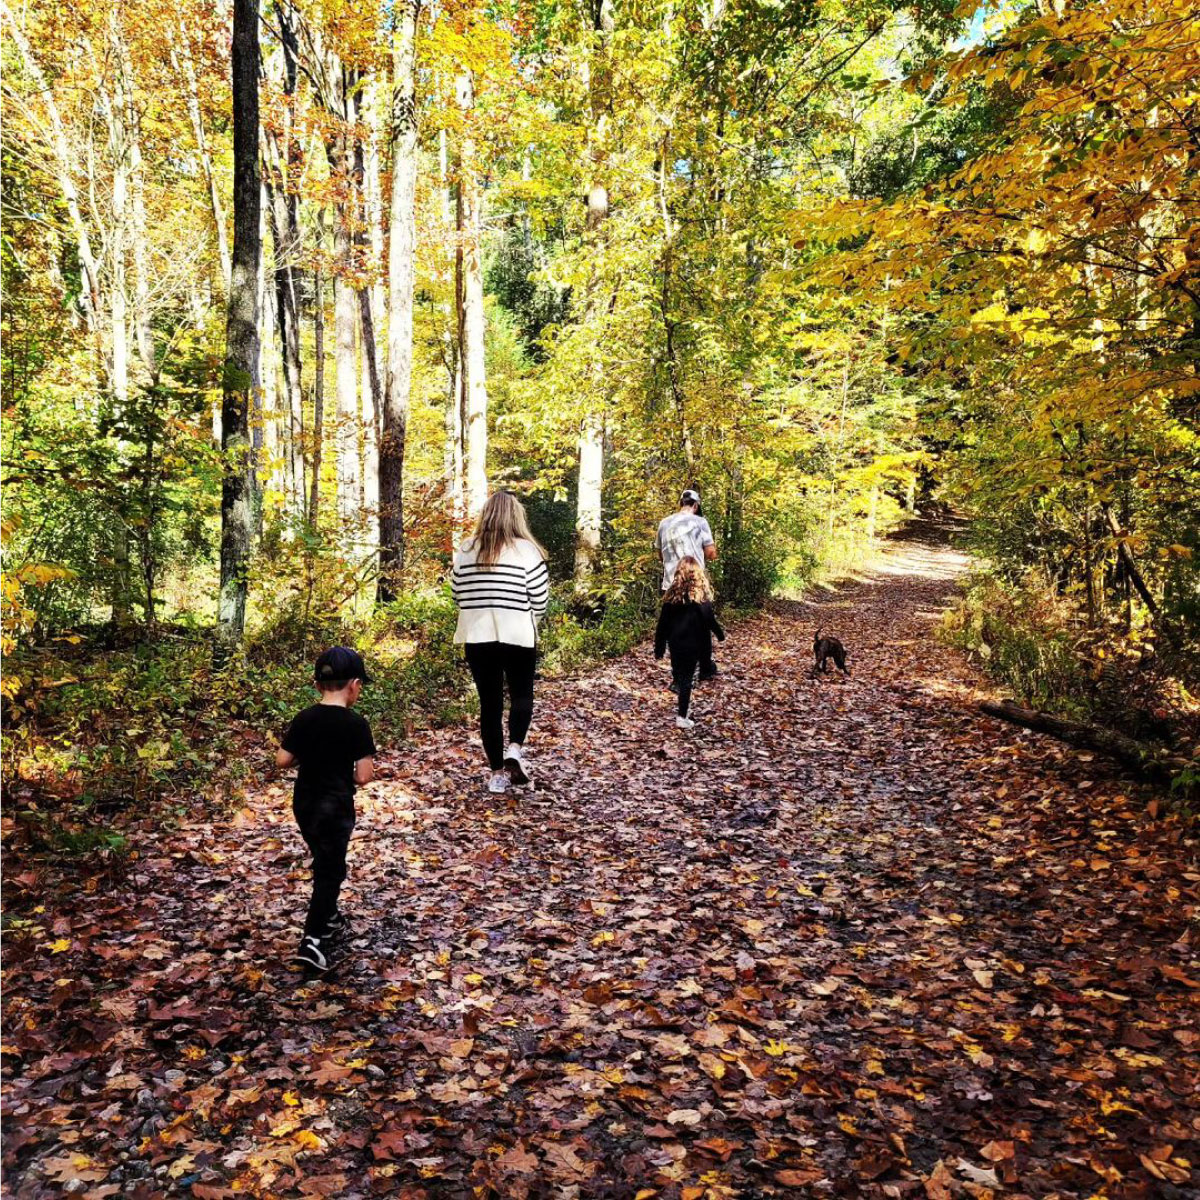 Hikers on a trail in Fall